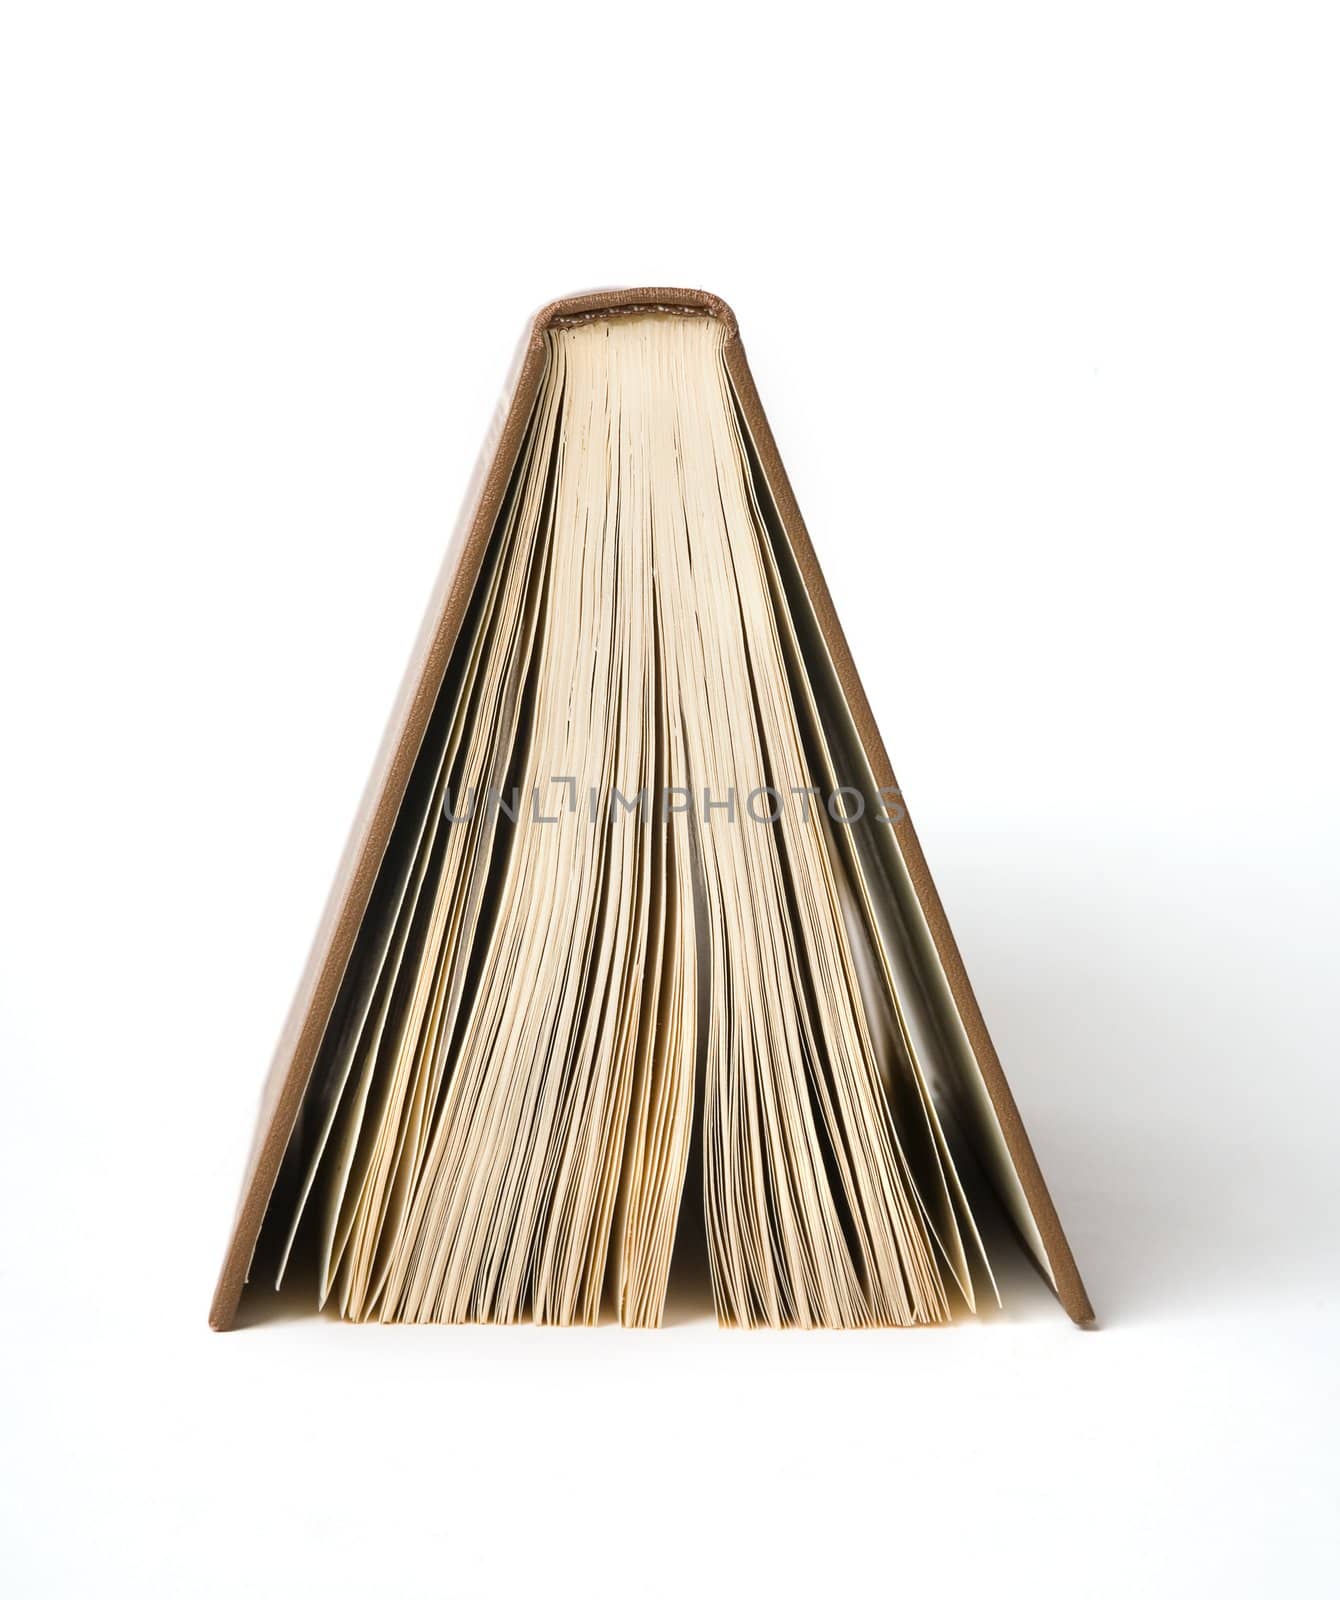 The book stands a back up on a white background
